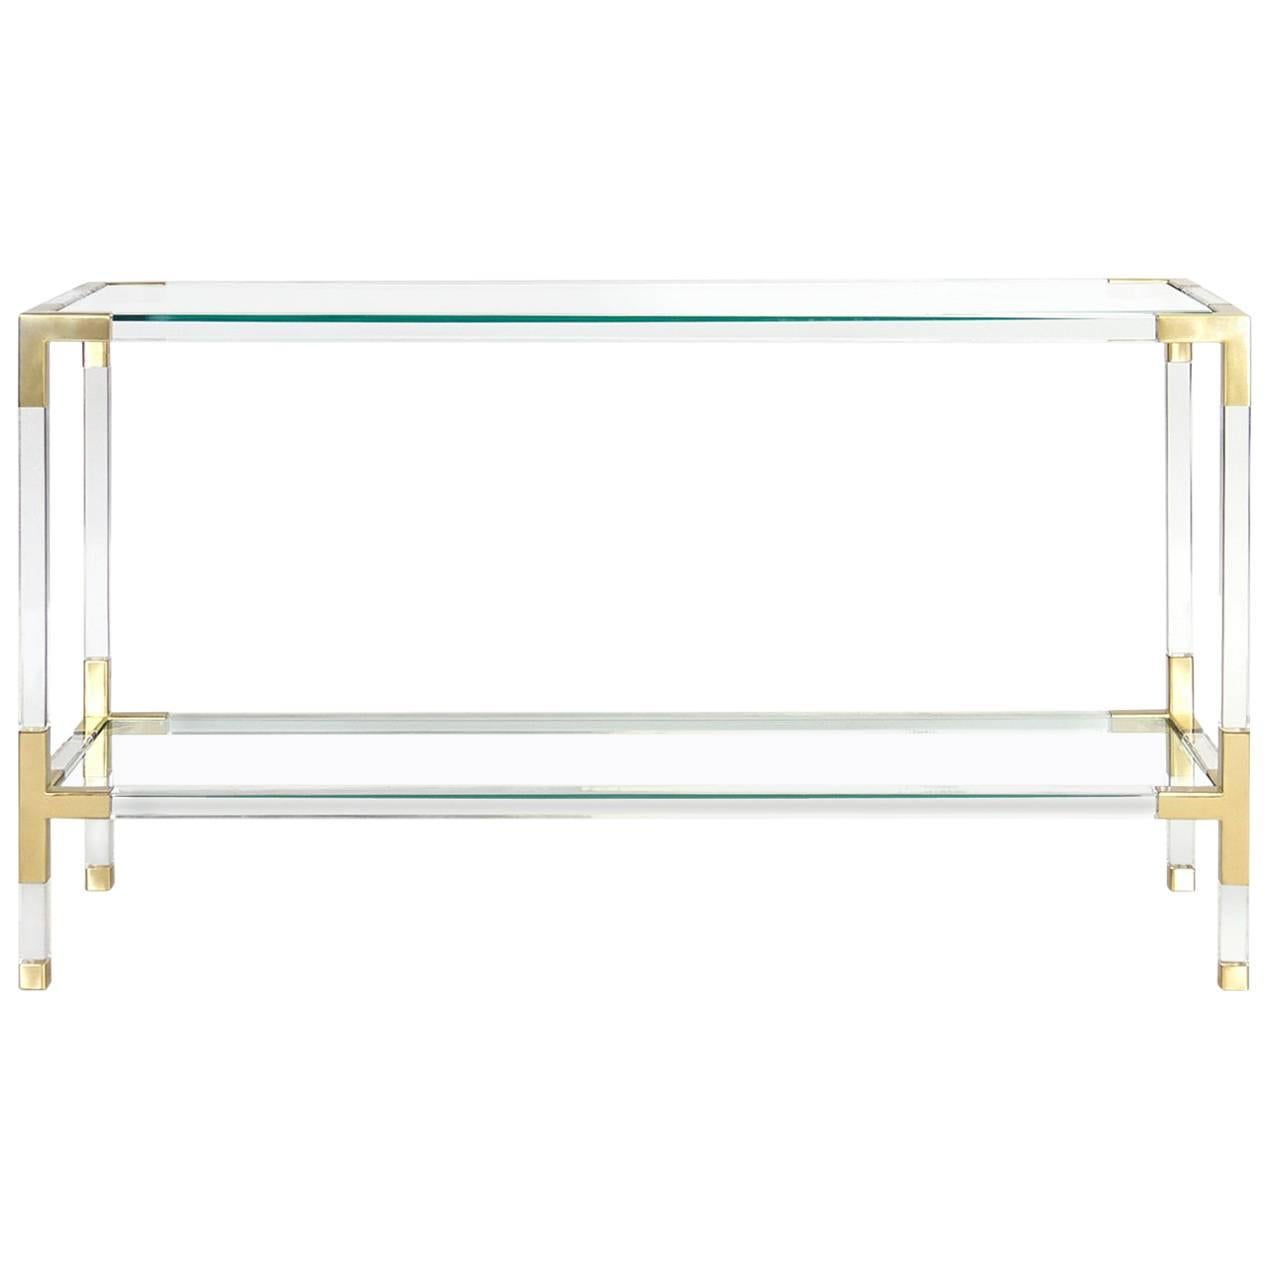 Clearly cool. Our Jacques collection is the perfect blend of simplicity and glamour, modern and traditional, in crystal clear Lucite with brushed brass corners. Fitted with a low glass shelf for baubles or books, our Jacques console works perfectly